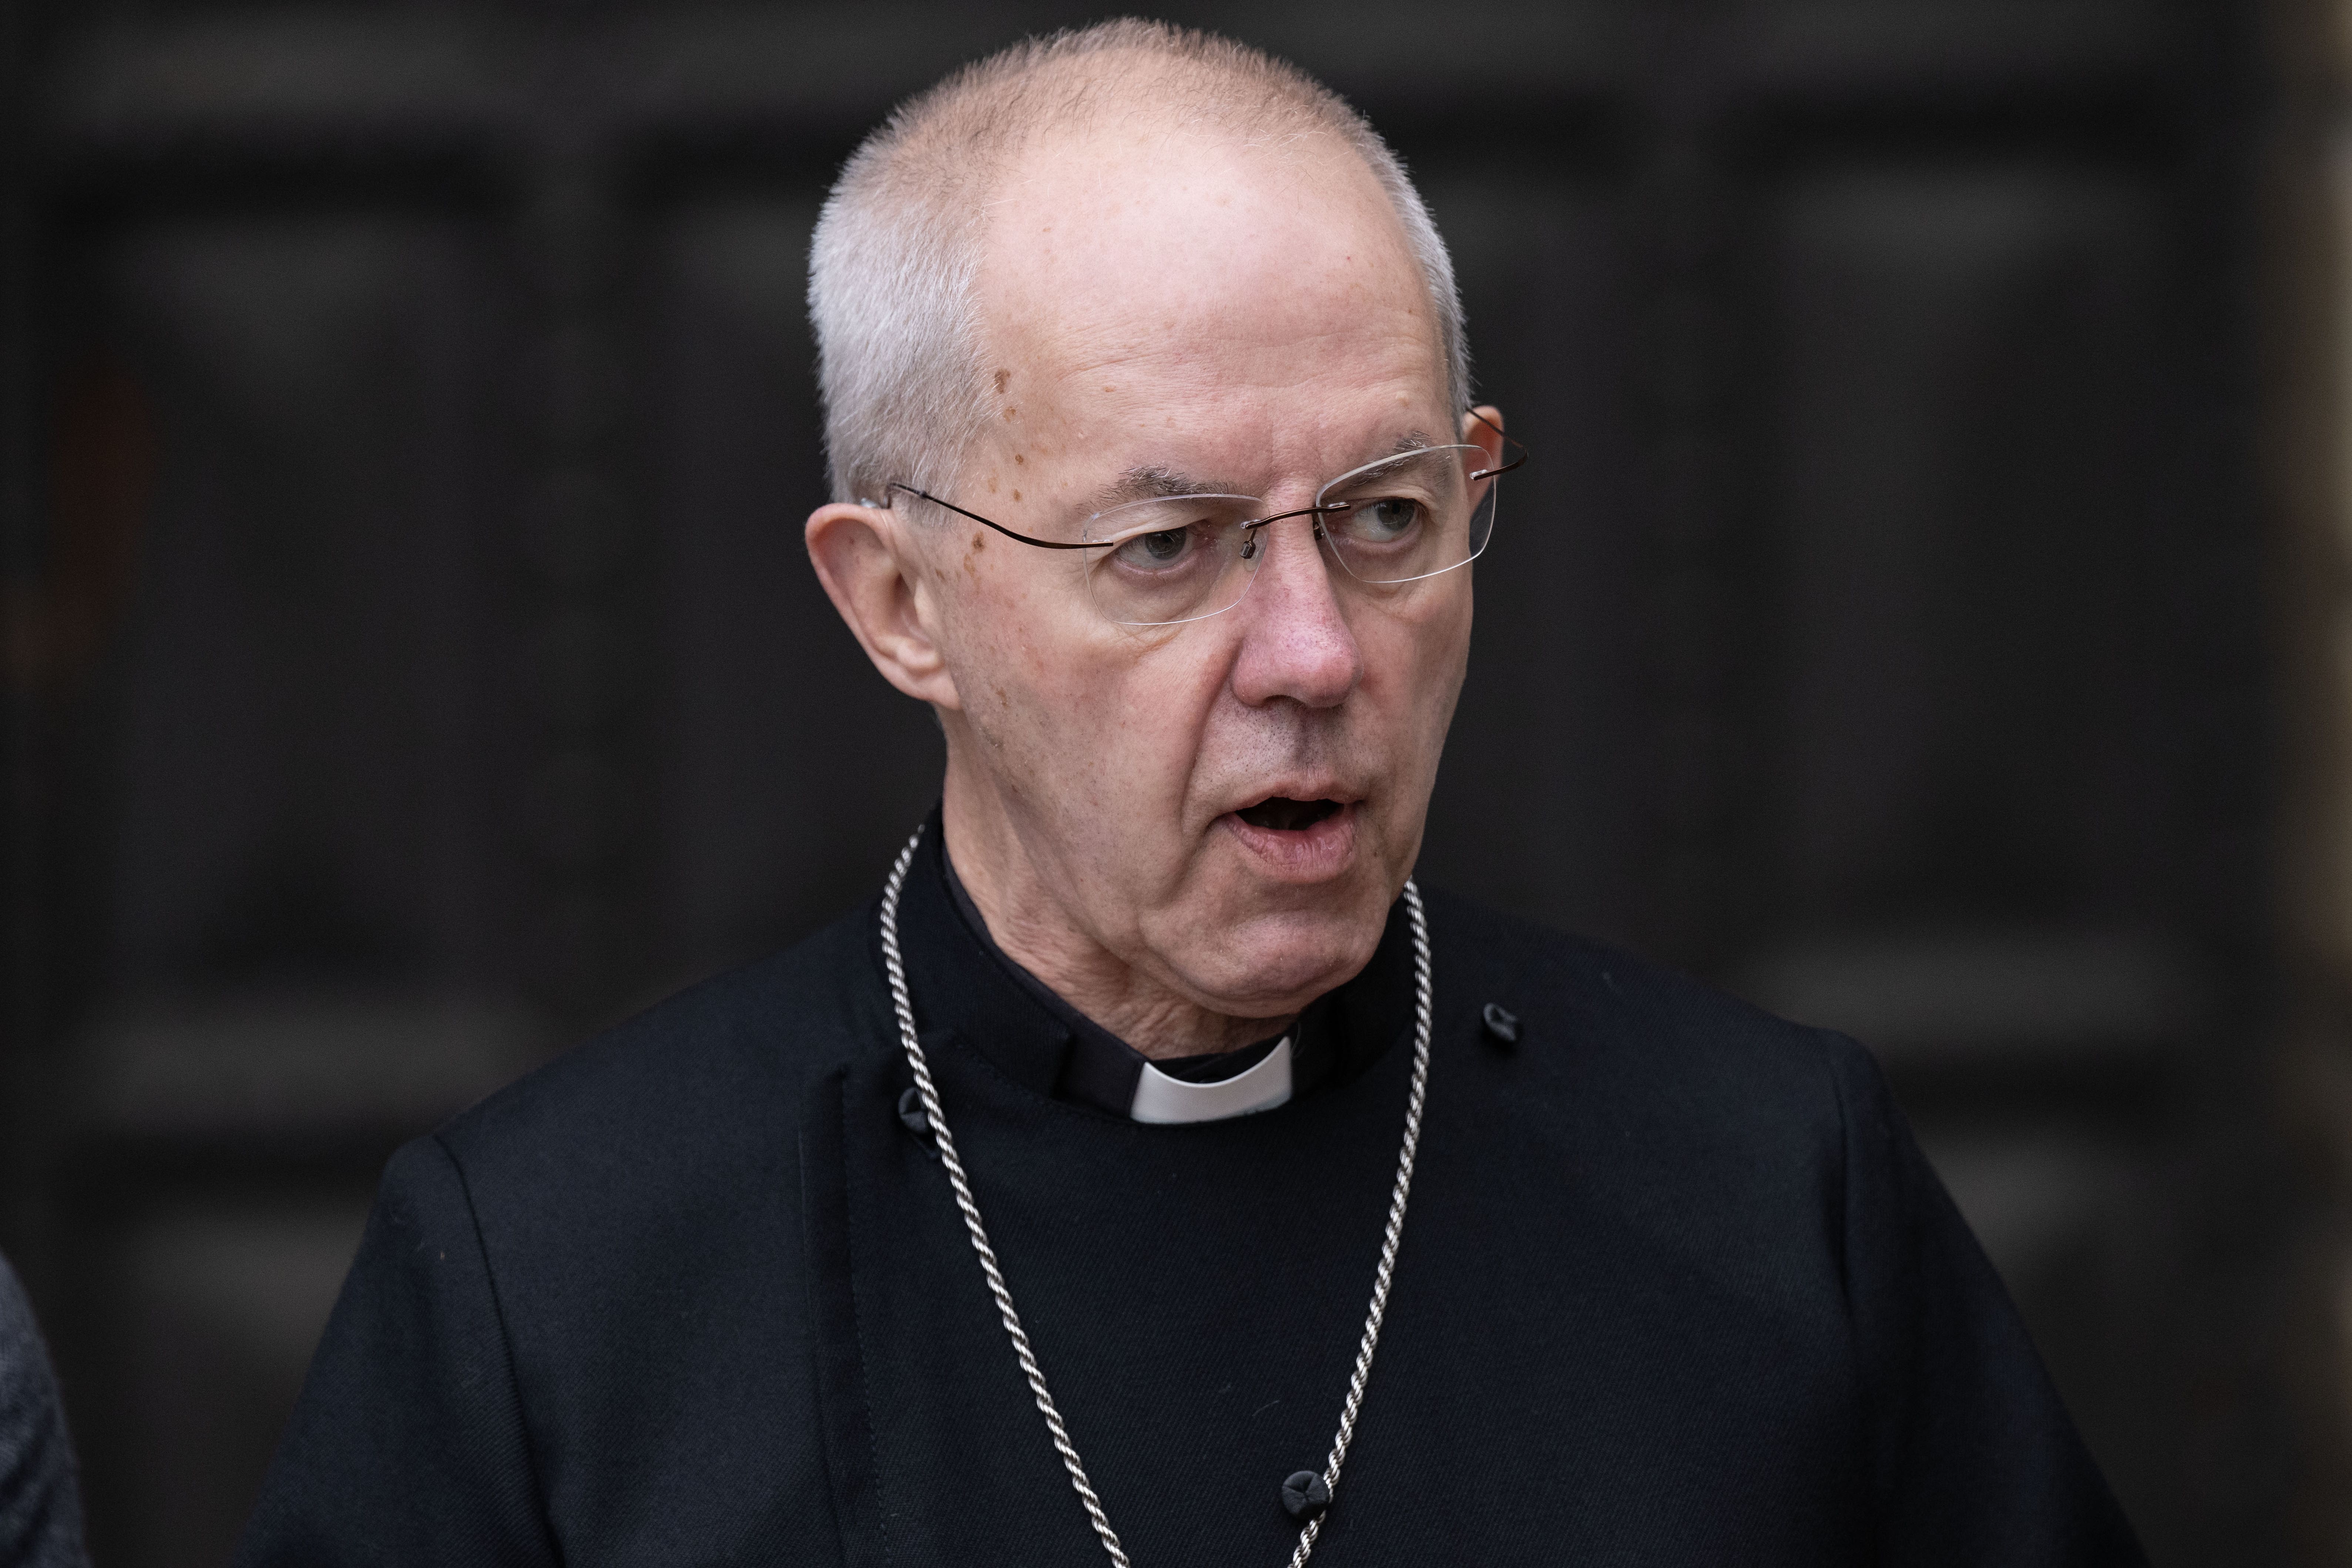 Archbishop of Canterbury Justin Welby has been a leading critic of the legislation (Doug Peters/PA)